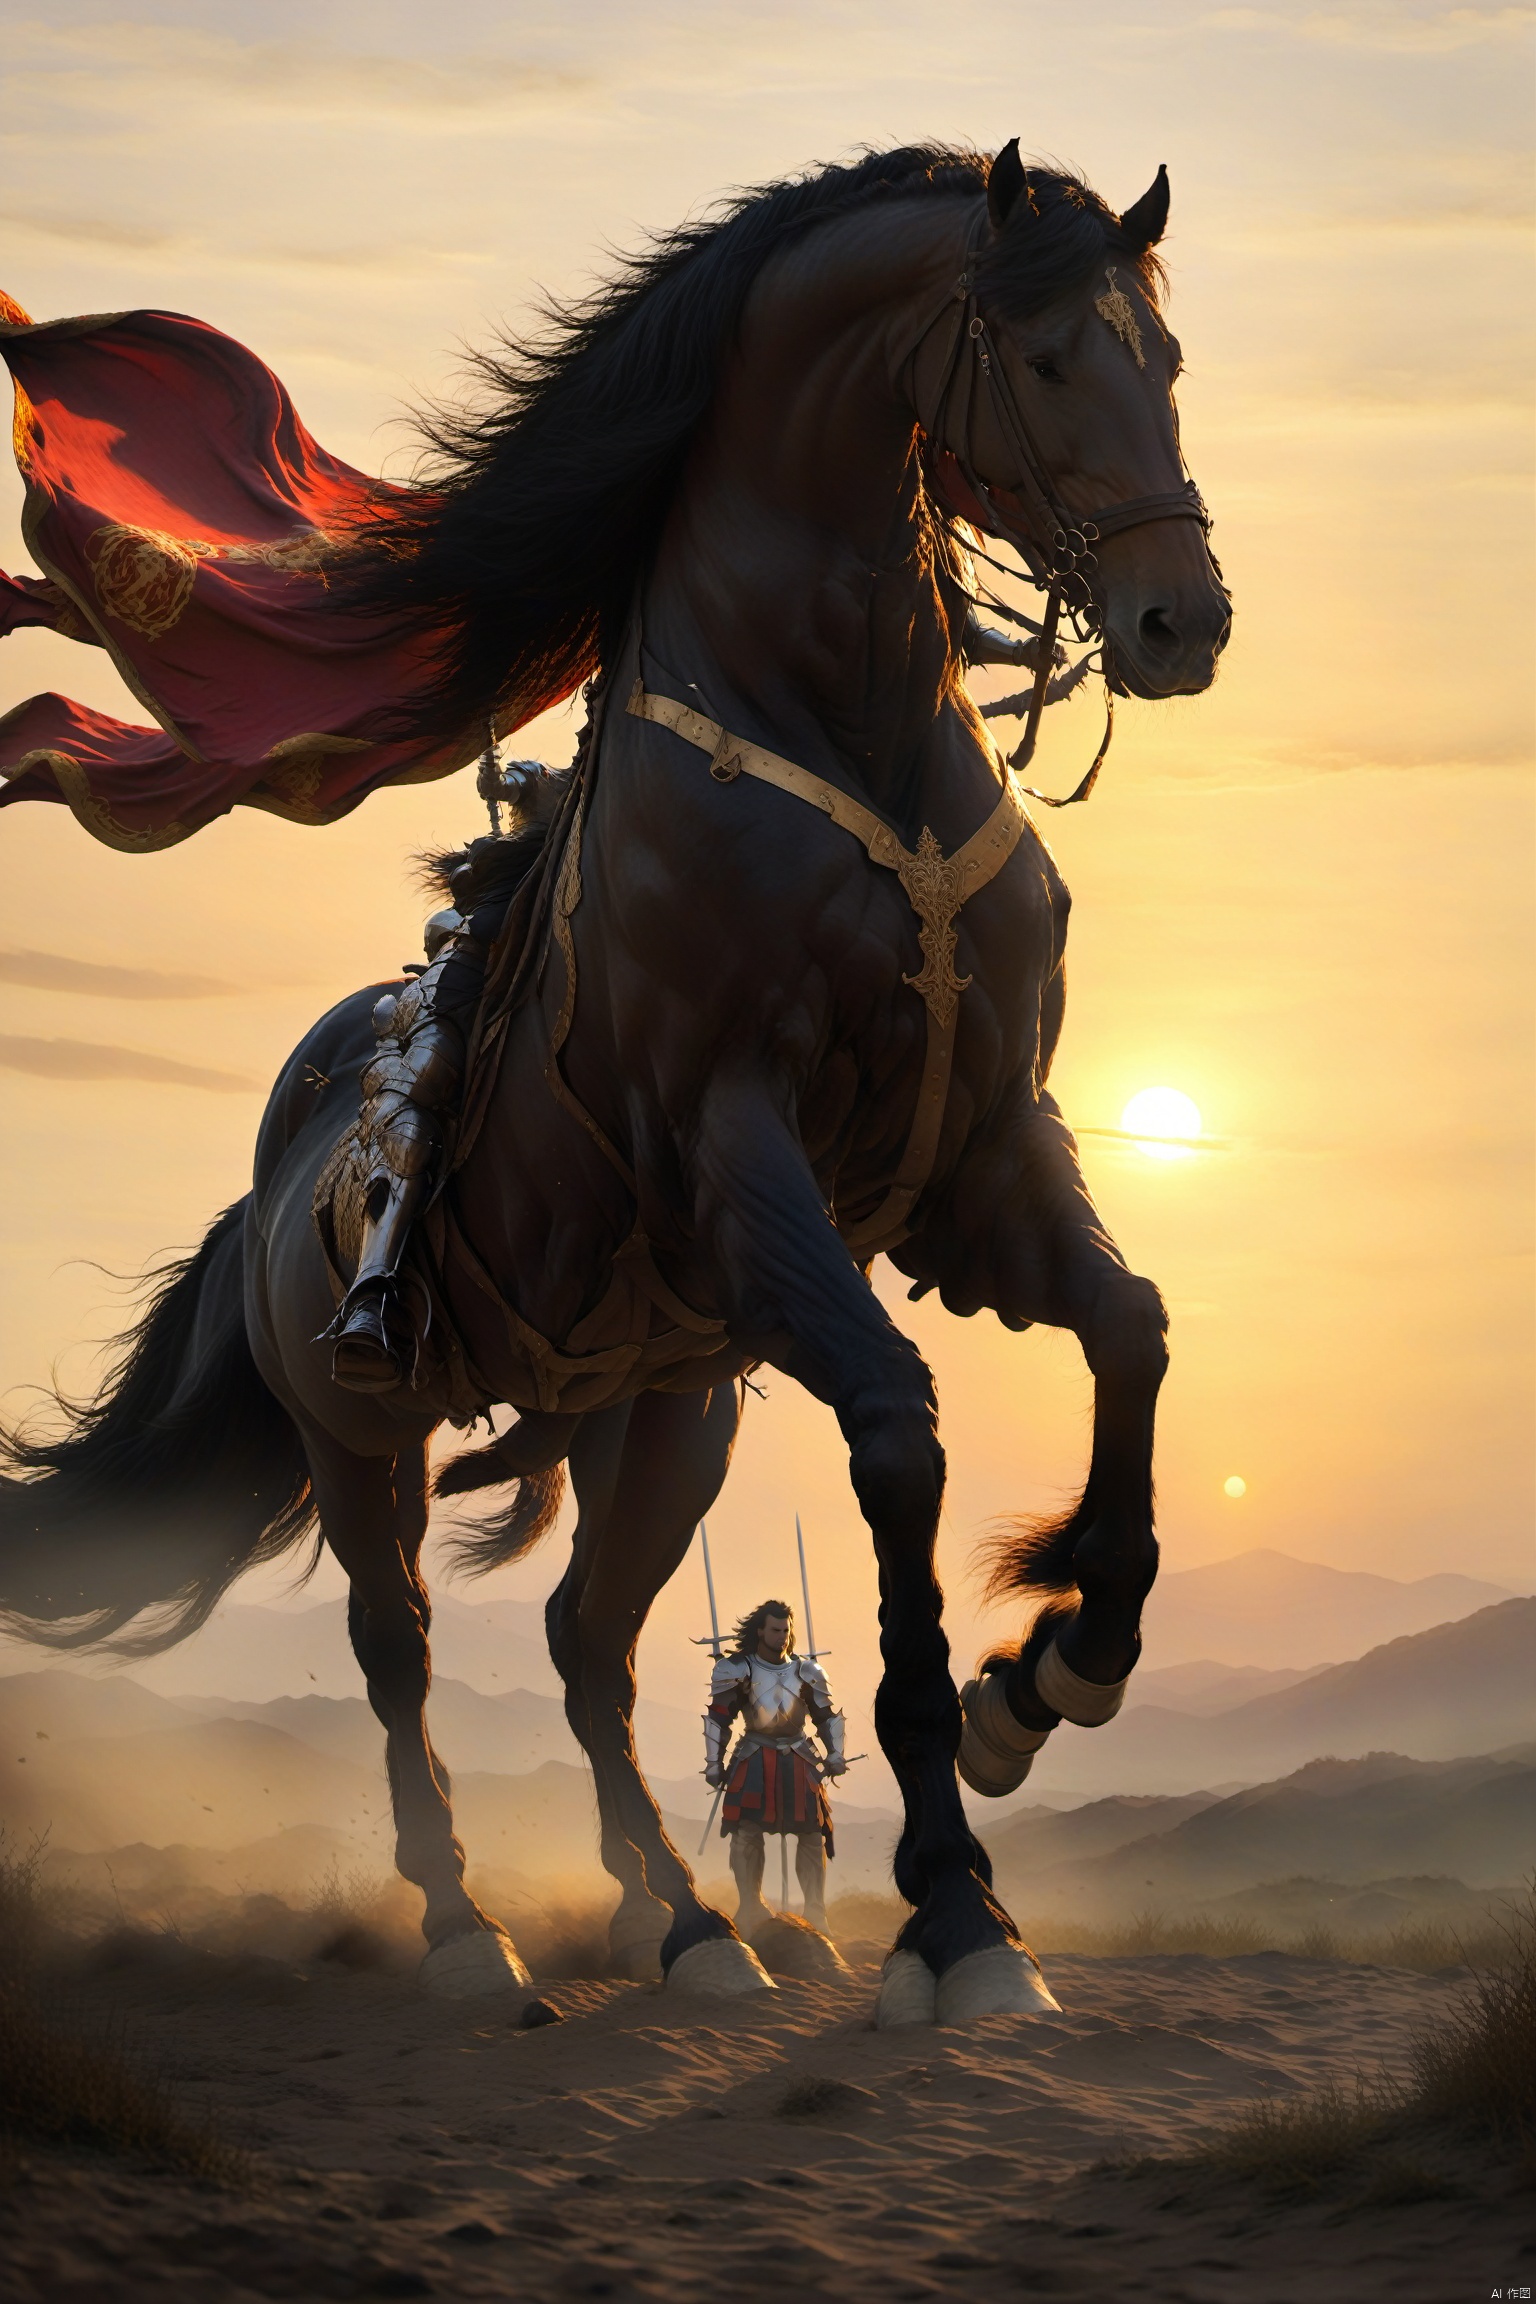 A noble knight and a majestic stallion, its coat as dark as the midnight sky, stand together on a battlefield, the knight’s armor gleaming in the light of the setting sun, his sword raised high, prepared to lead his men into battle, the stallion’s mane flowing like a banner, its stance proud and strong, their courage and strength inspiring all who fight alongside them.